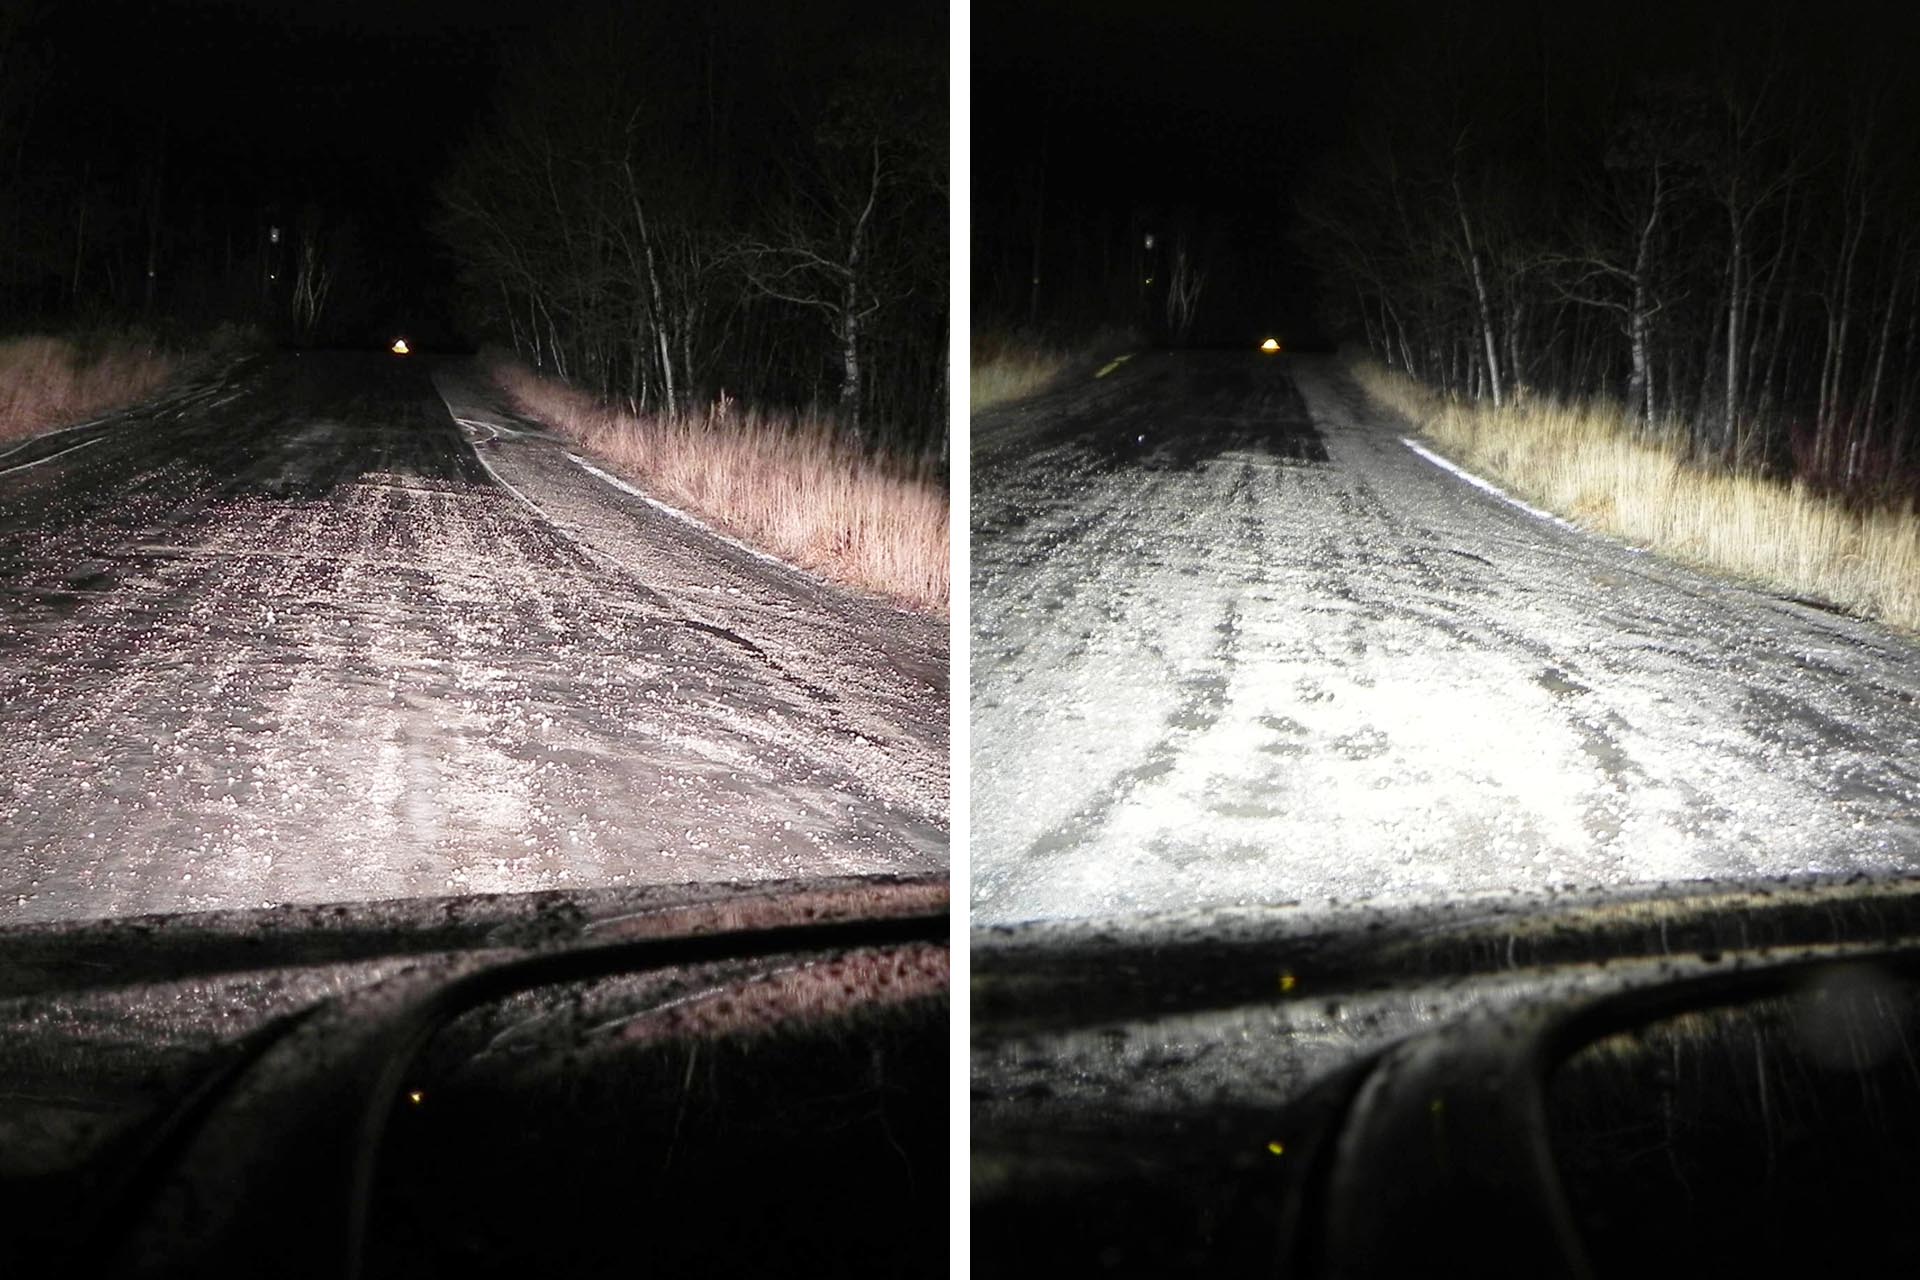 Here, you can see the difference in lighting output and saturation after installing a drop-in xenon lighting kit. Note the whiter, farther-reaching light and reduced dark spots on the road ahead.